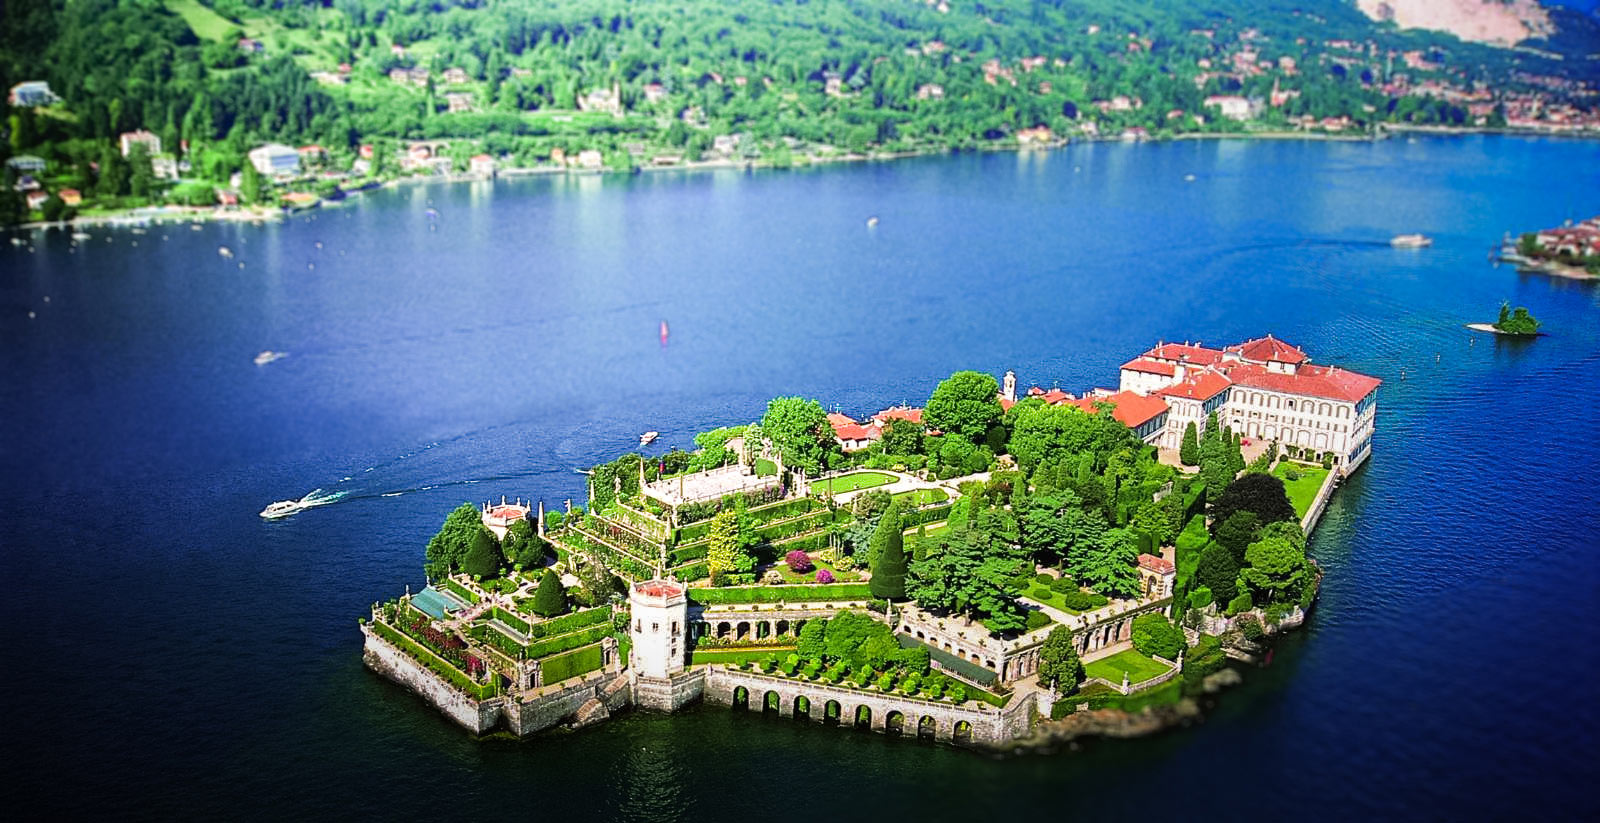 Lake Maggiore and the Borromean Islands - beautiful places in Italy